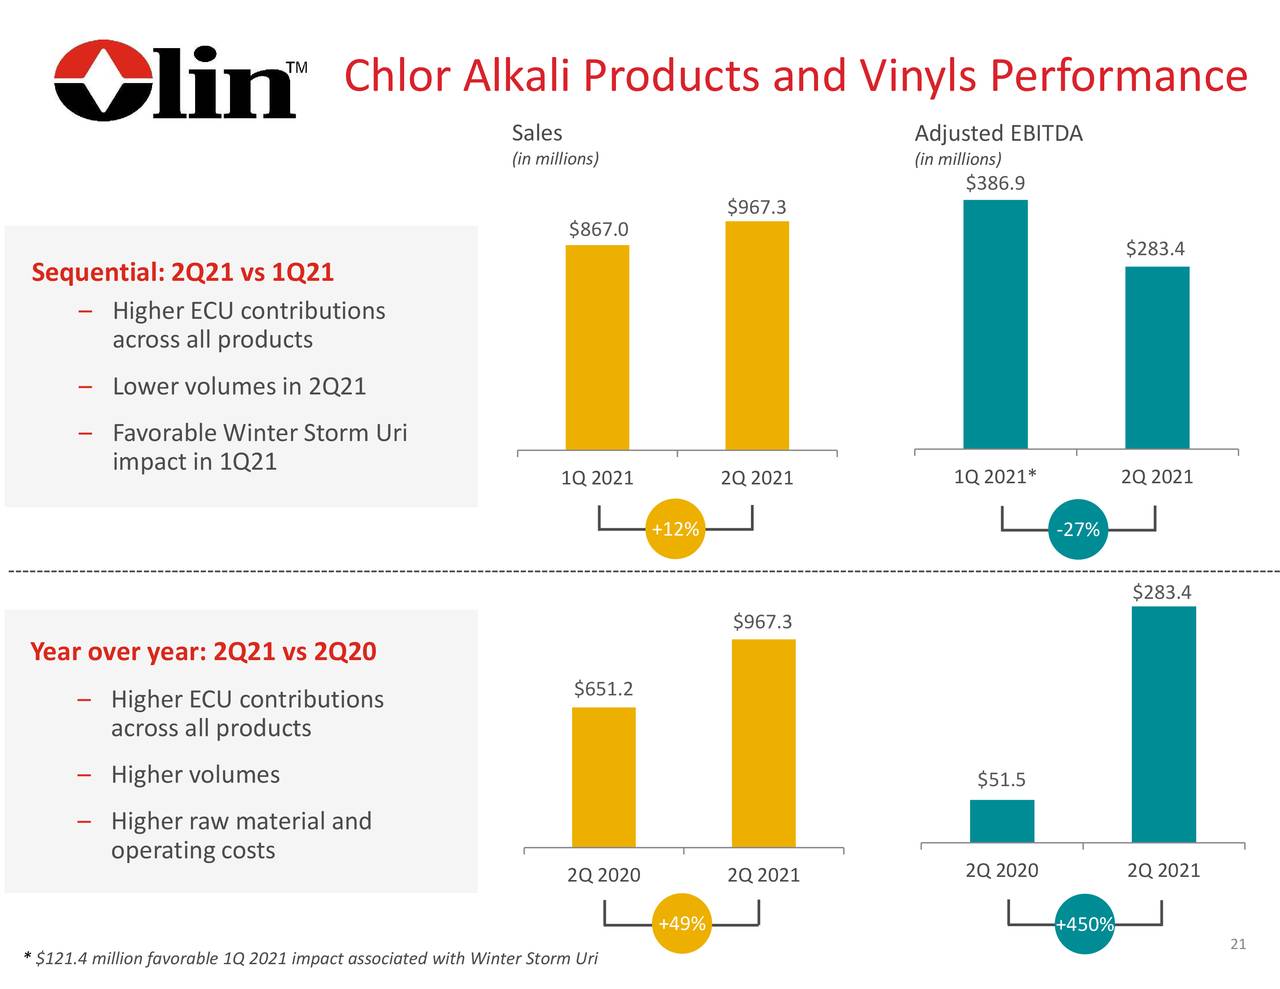 Olin Chlor Alkali Products and Vinyls Performance